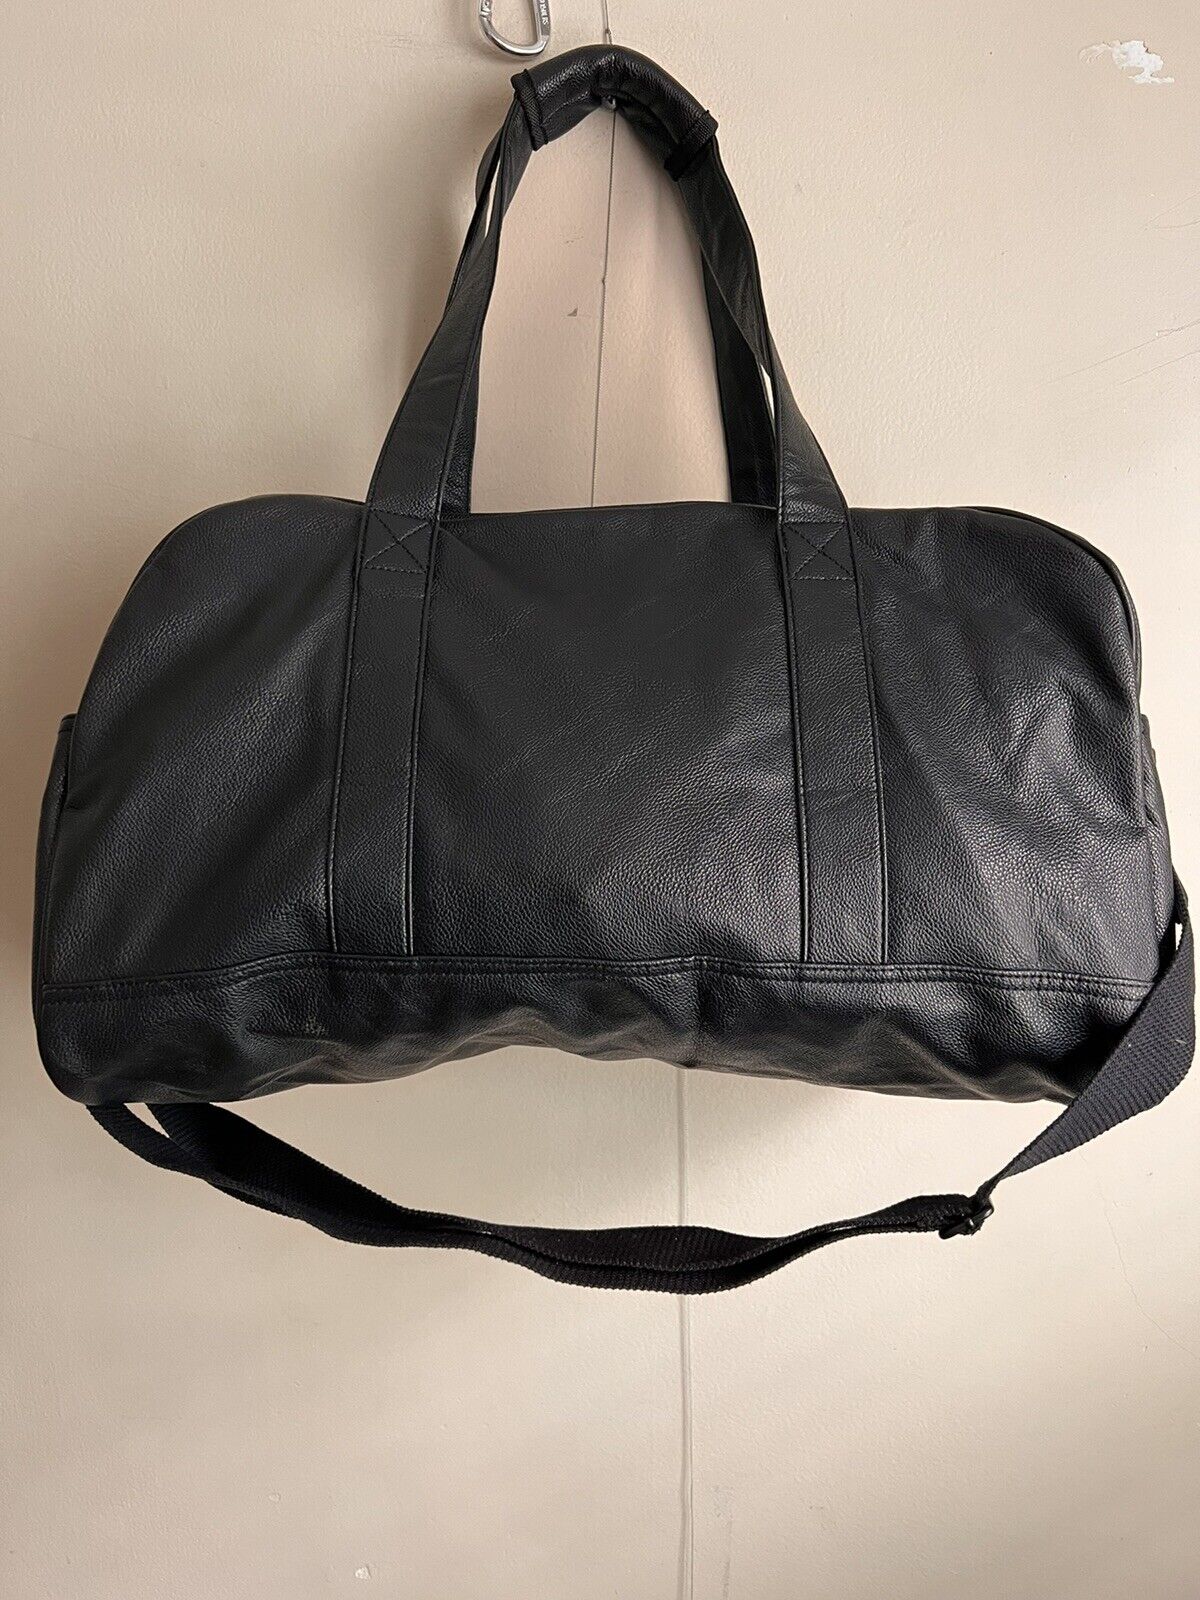 New Urban Outfitters Rosin Vegan Leather Duffle Bag MSRP: $120